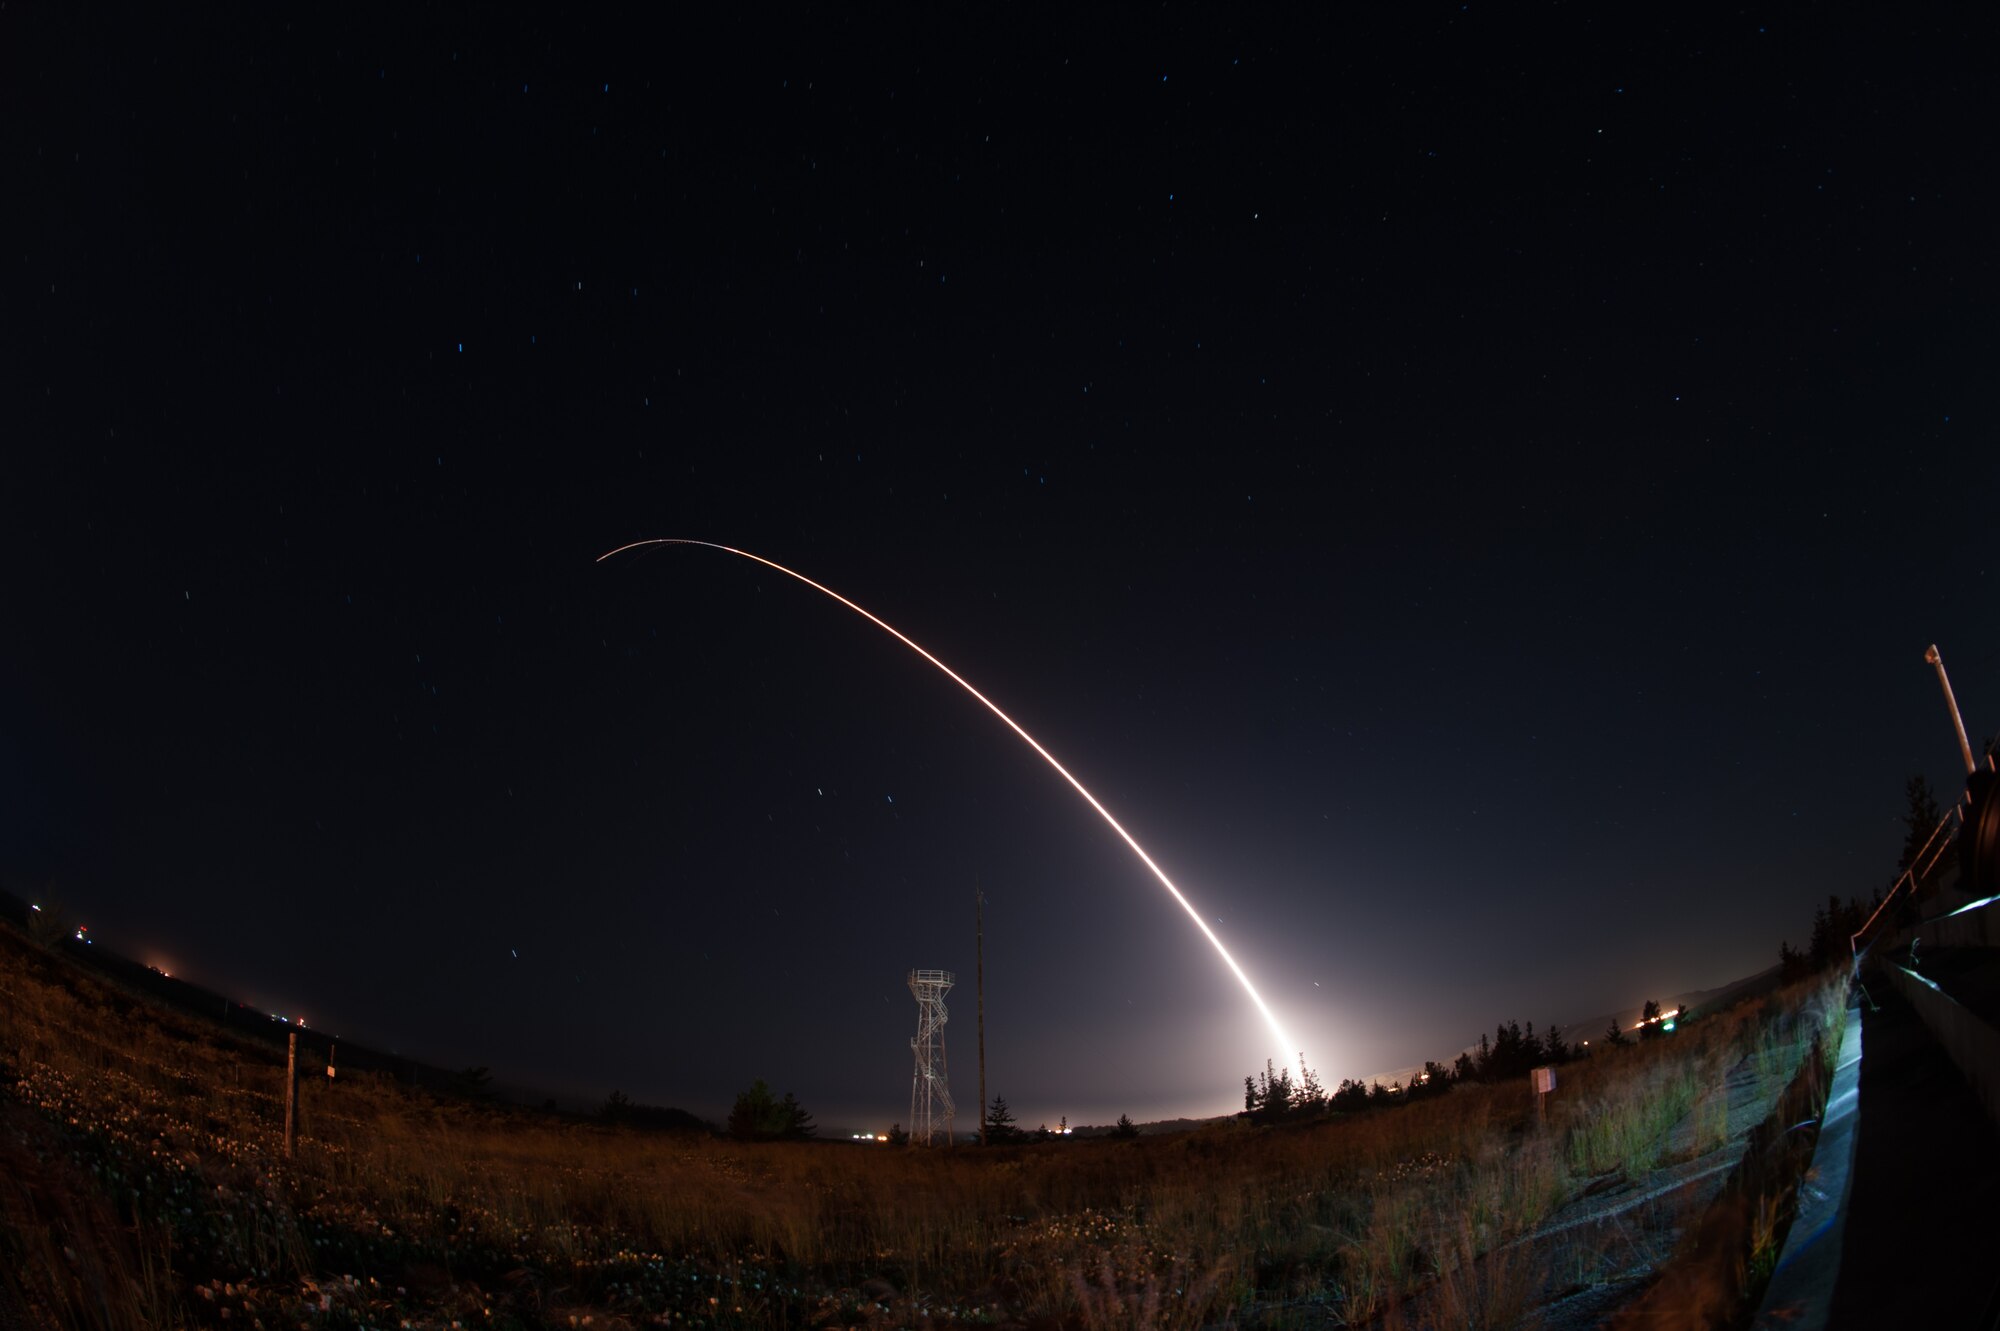 An unarmed Minuteman III intercontinental ballistic missile launches during an operational test at 12:03 a.m., PDT, April 26, from Vandenberg Air Force Base, Calif. (U.S. Air Force photo by Michael Peterson)